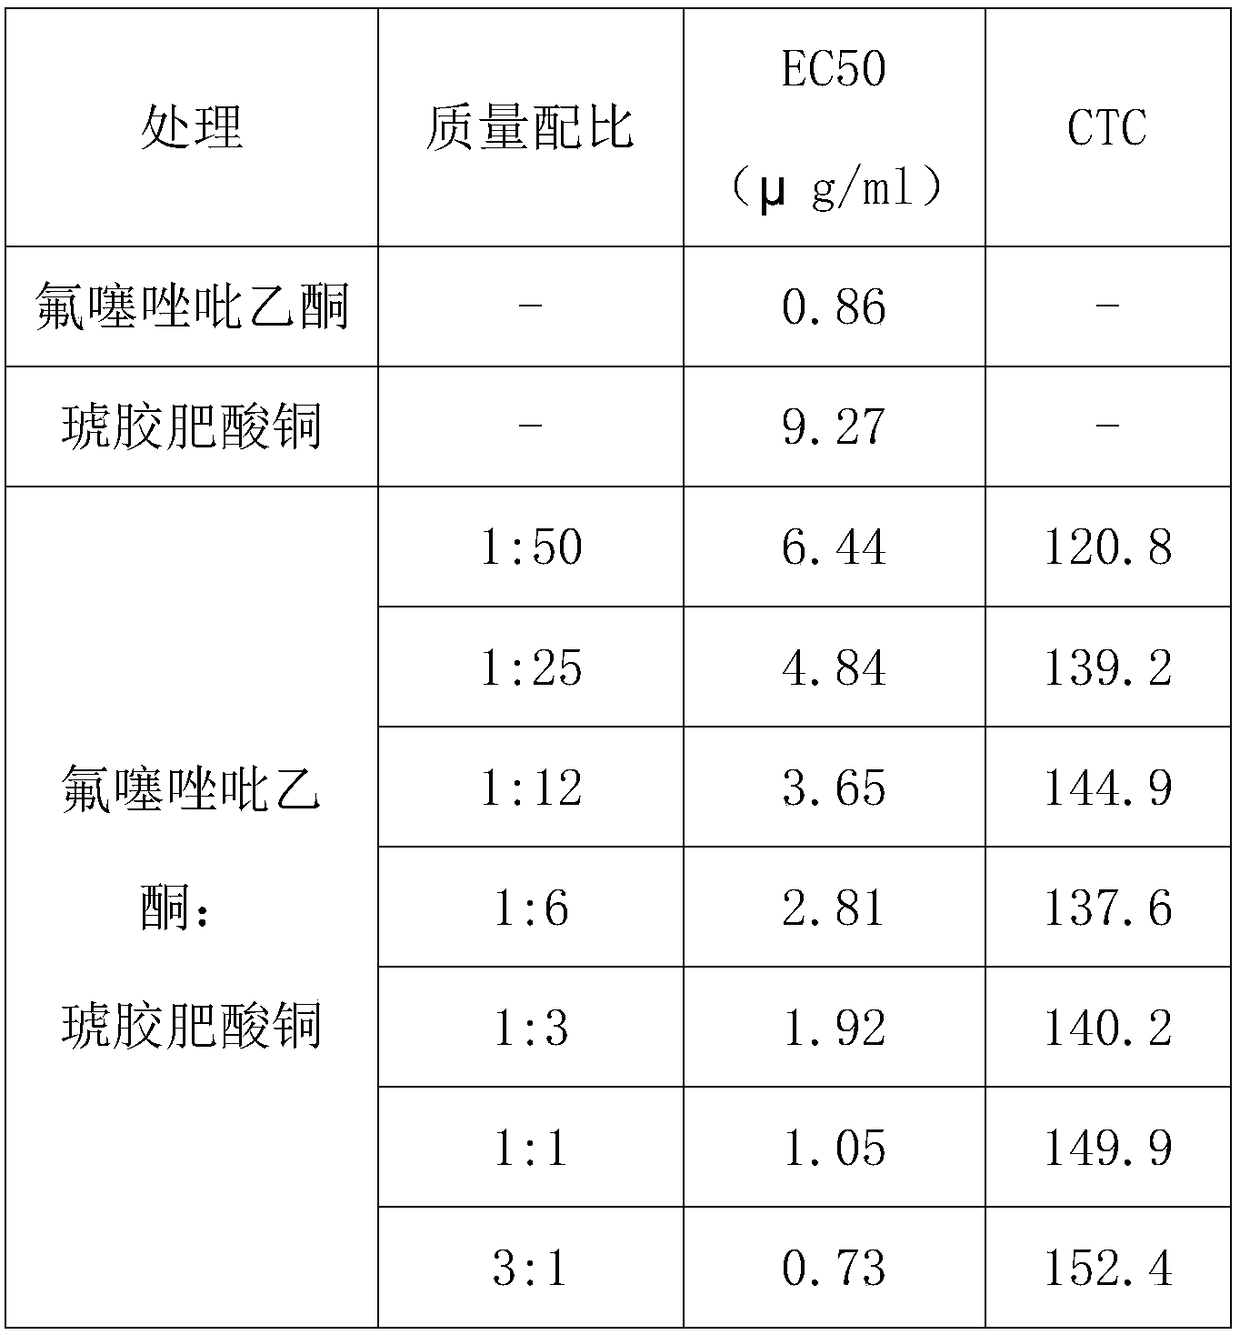 Bactericidal composition containing oxathiapiprolin and copper(succinate-glutarate-adipate)